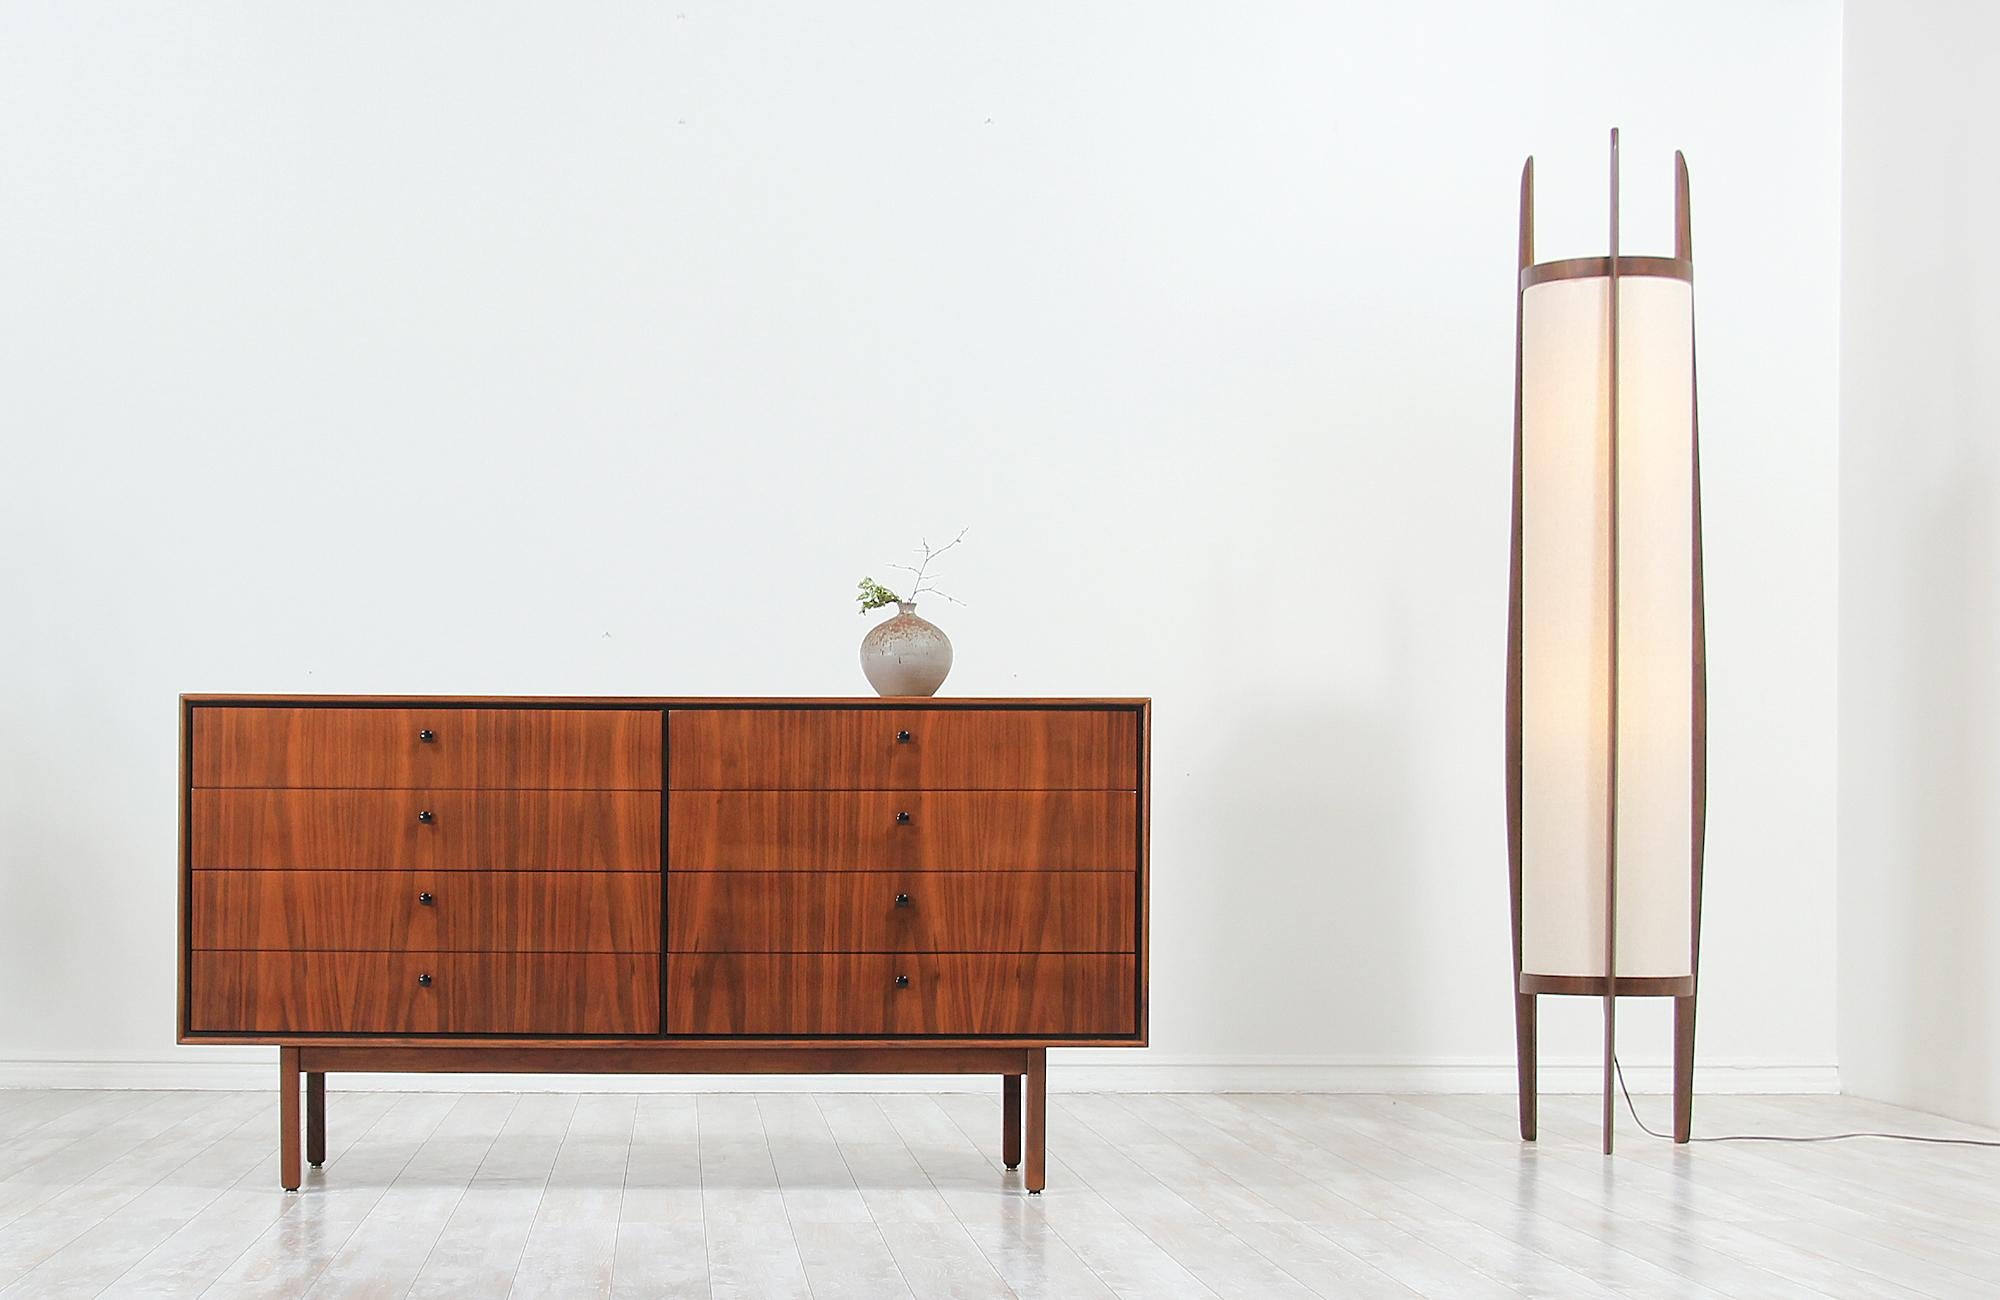 Elegant Mid-Century Modern dresser designed by Milo Baughman for Arch Gordon in the United States circa 1960s. This spectacular eight-drawer dresser features a walnut-veneered case supported by tapered legs and continuous grain that flows throughout